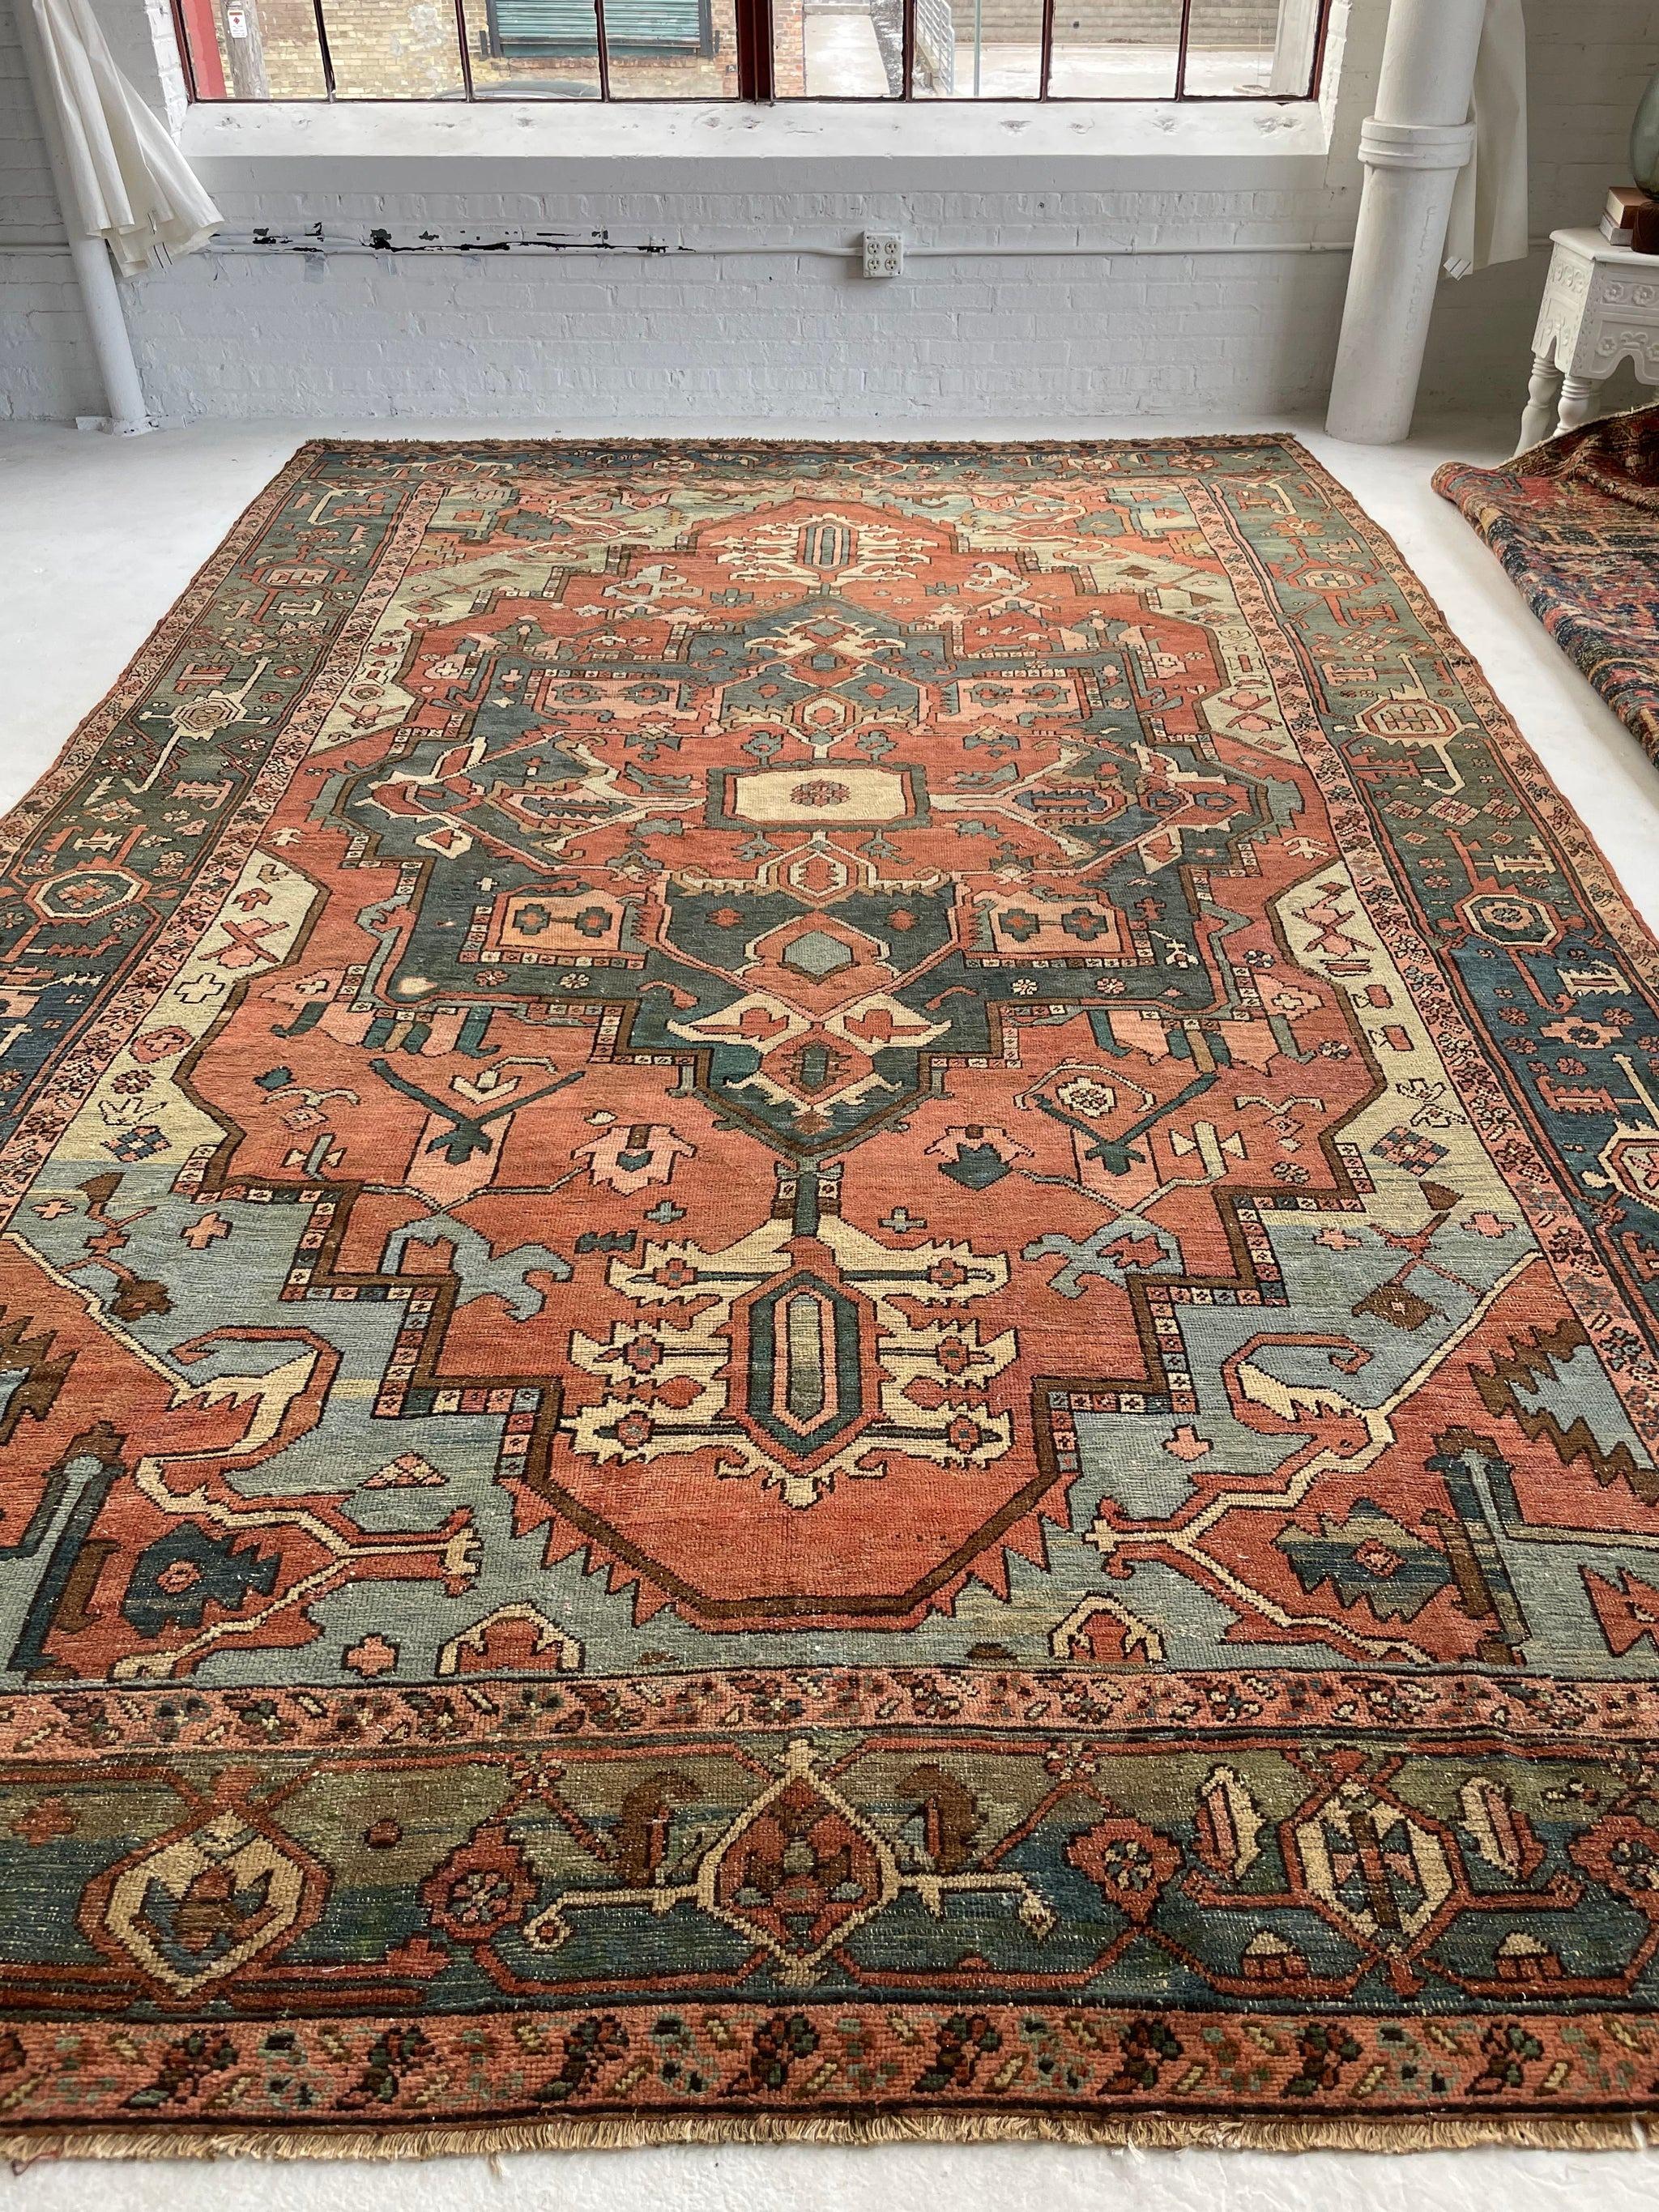 Antique Persian Green And Terracotta Serapi Carpet Rug, circa 1880-1900's In Good Condition For Sale In Milwaukee, WI